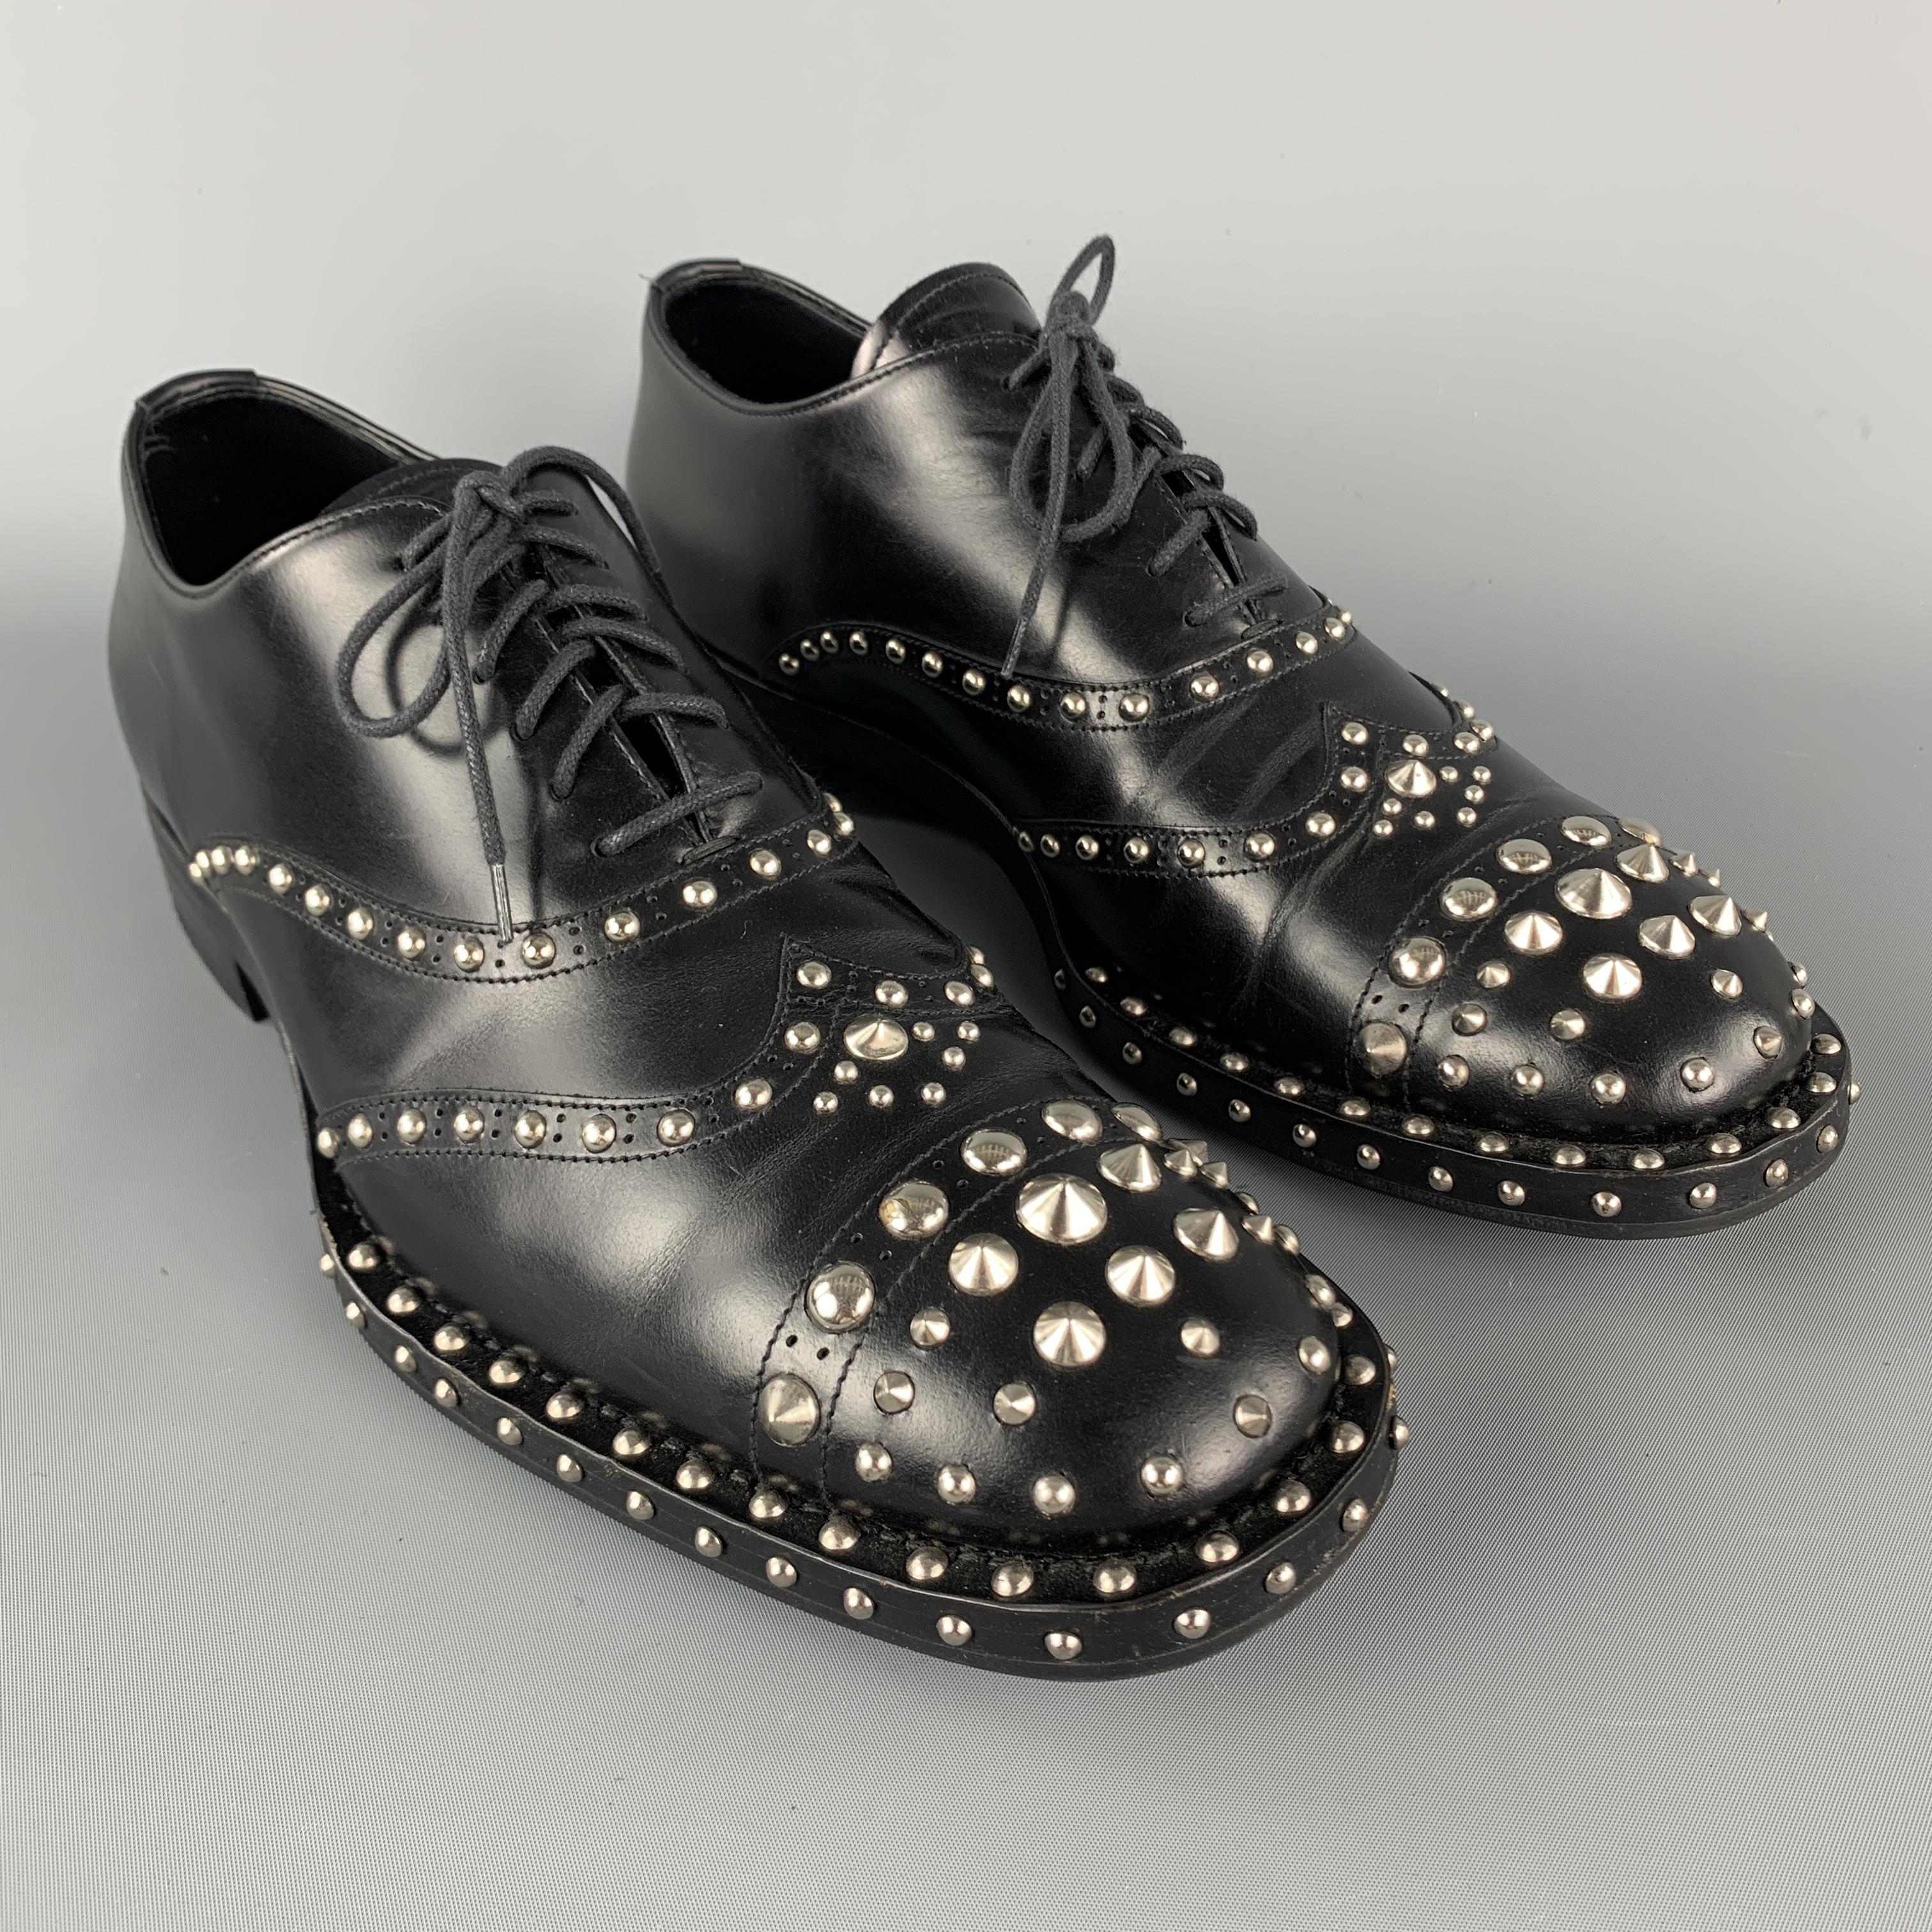 PRADA Fall / Winter 09 Lace Up Shoes comes in a solid black leather material, featuring studs, and a cap toe. Made in Italy.

Excellent Pre-Owned Condition.
Marked: 45

Outsole: 12.5 x 4.5 in.
